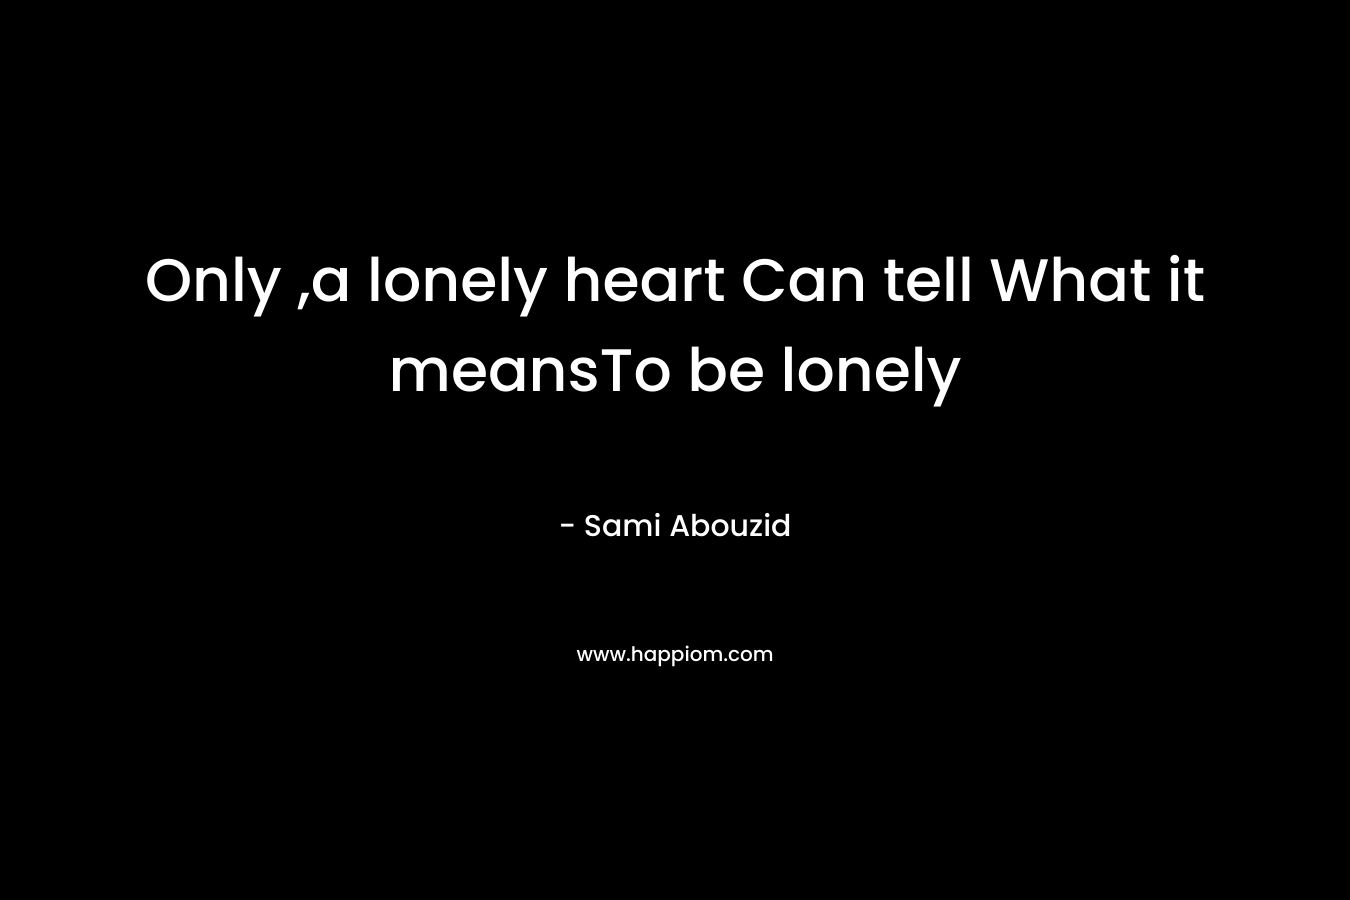 Only ,a lonely heart Can tell What it meansTo be lonely – Sami Abouzid